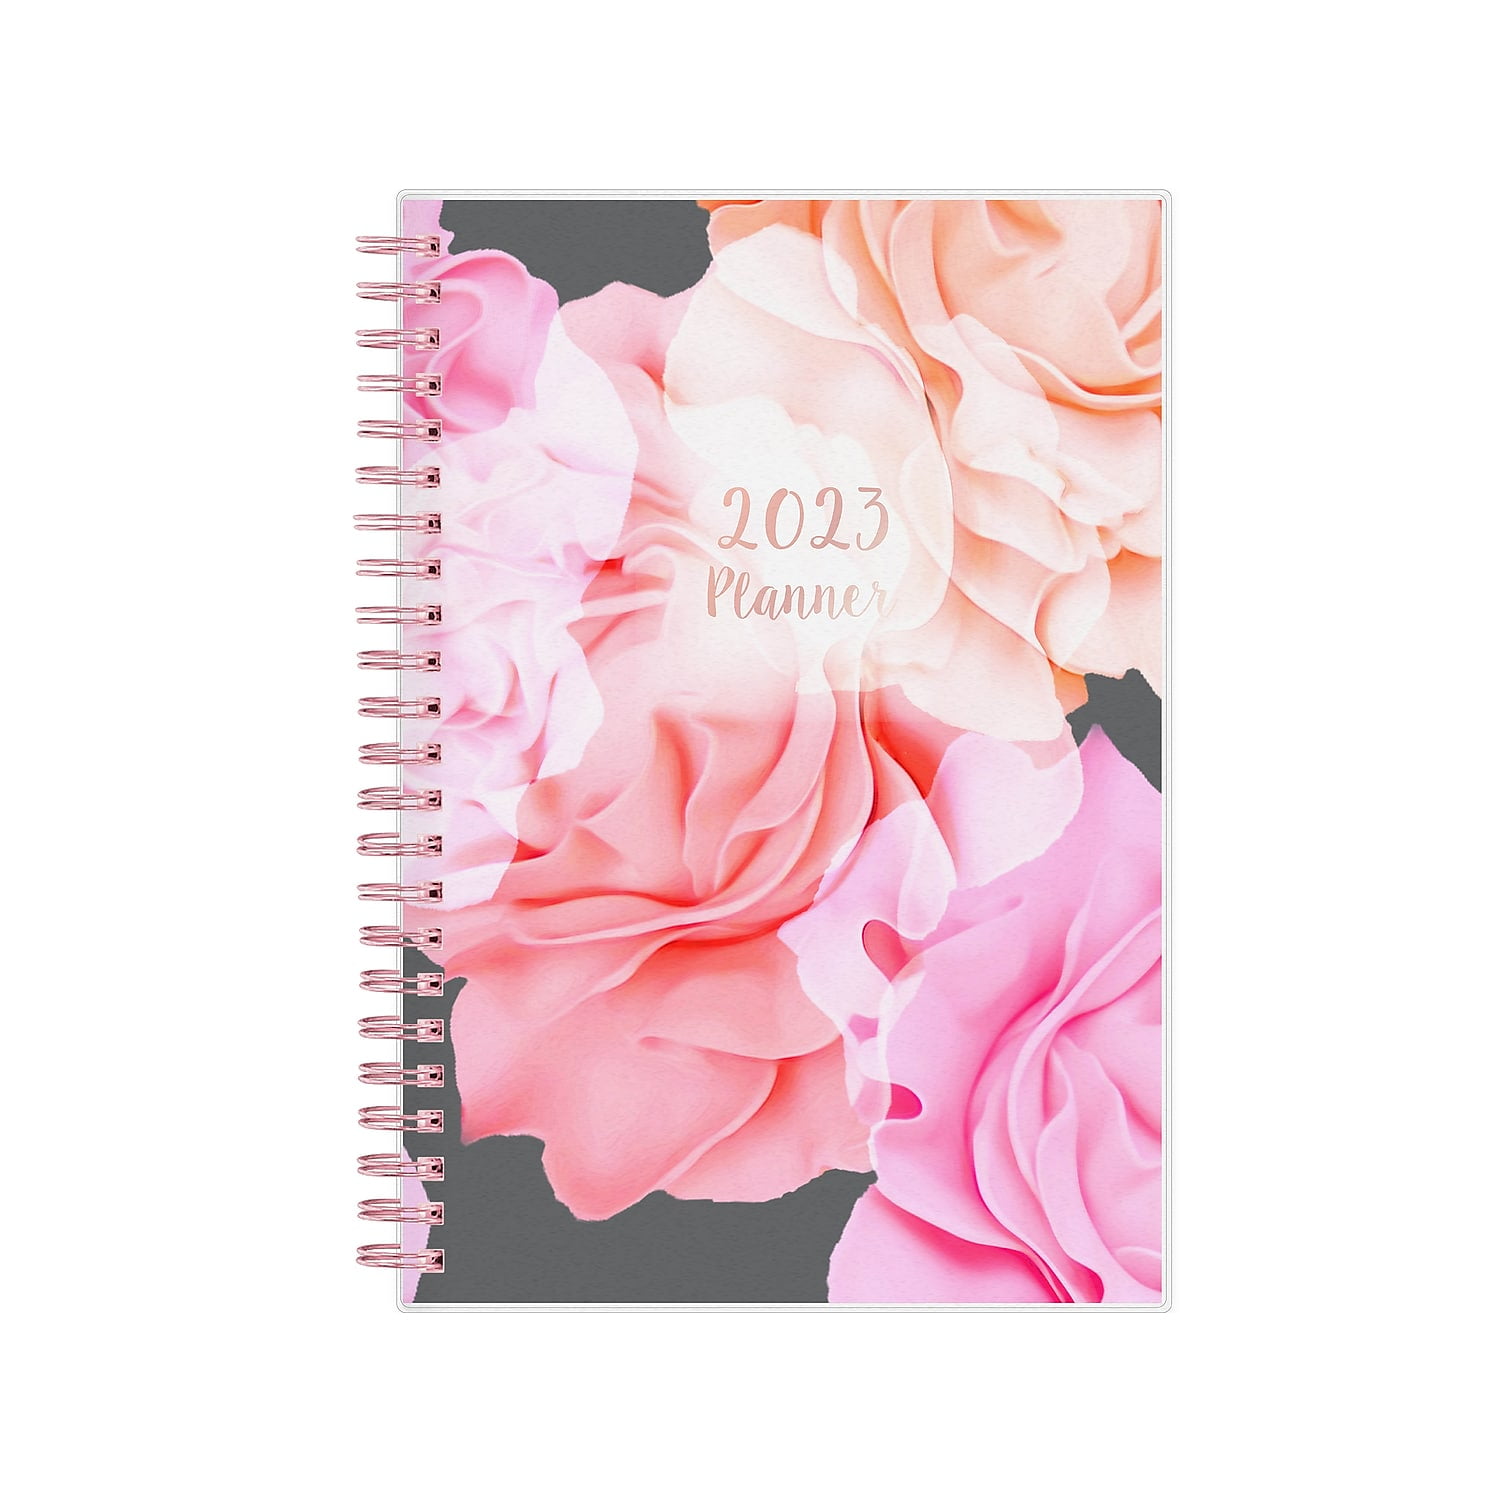 Twin-Wire Binding Orchid Flexible Cover 124095 Blue Sky 2021 Weekly & Monthly Planner 8.5 x 11 